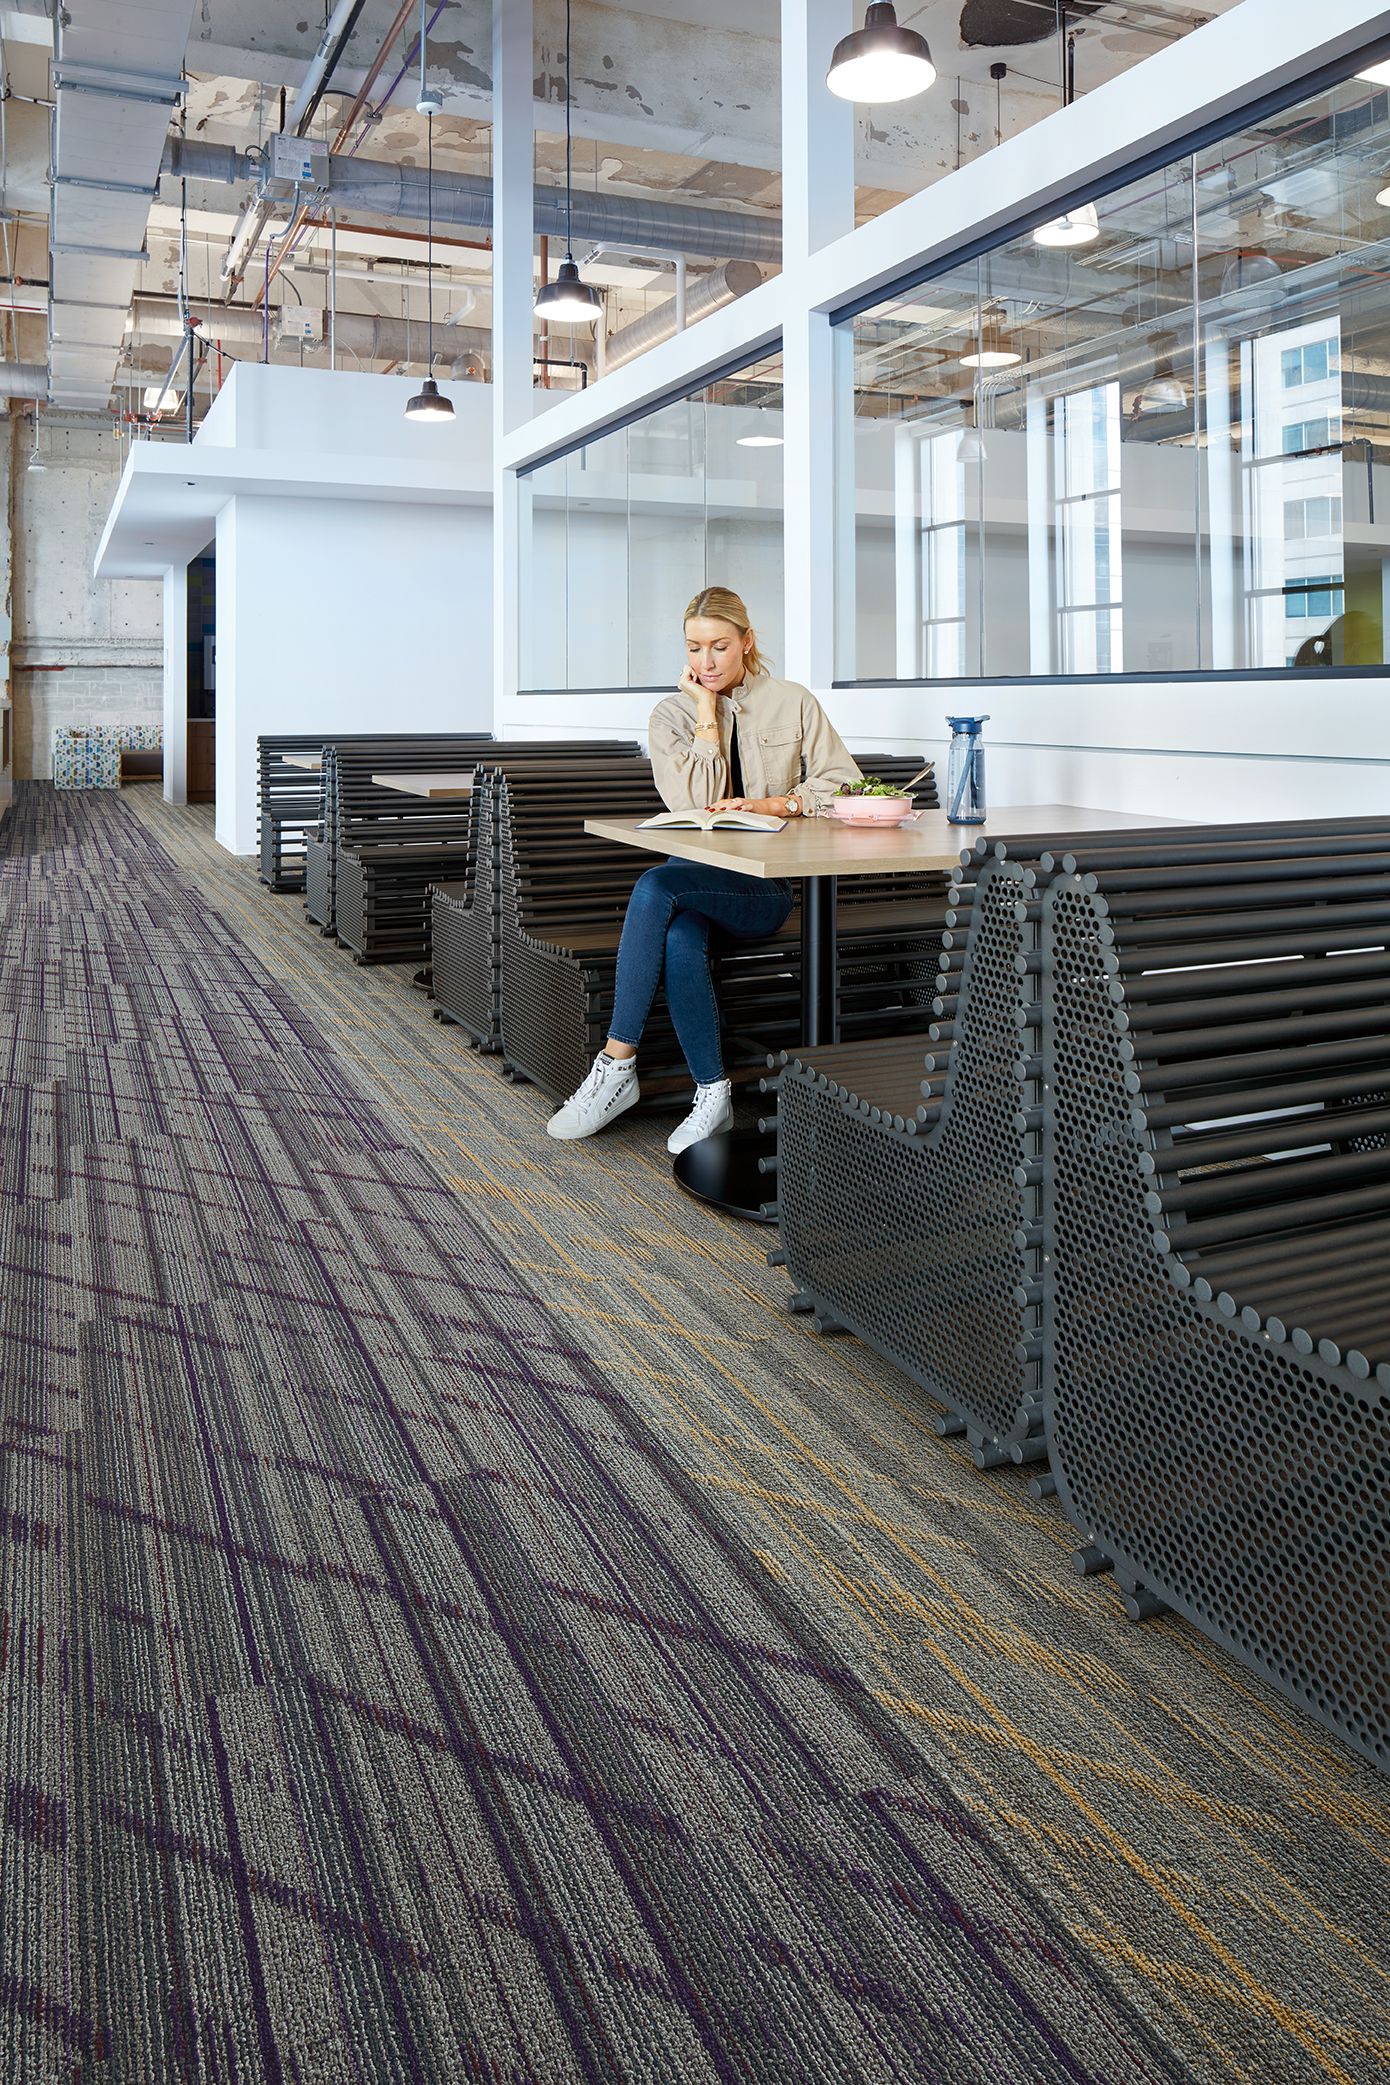 Interface Luminescent plank carpet tile in cafe area with woman seated at table numéro d’image 6